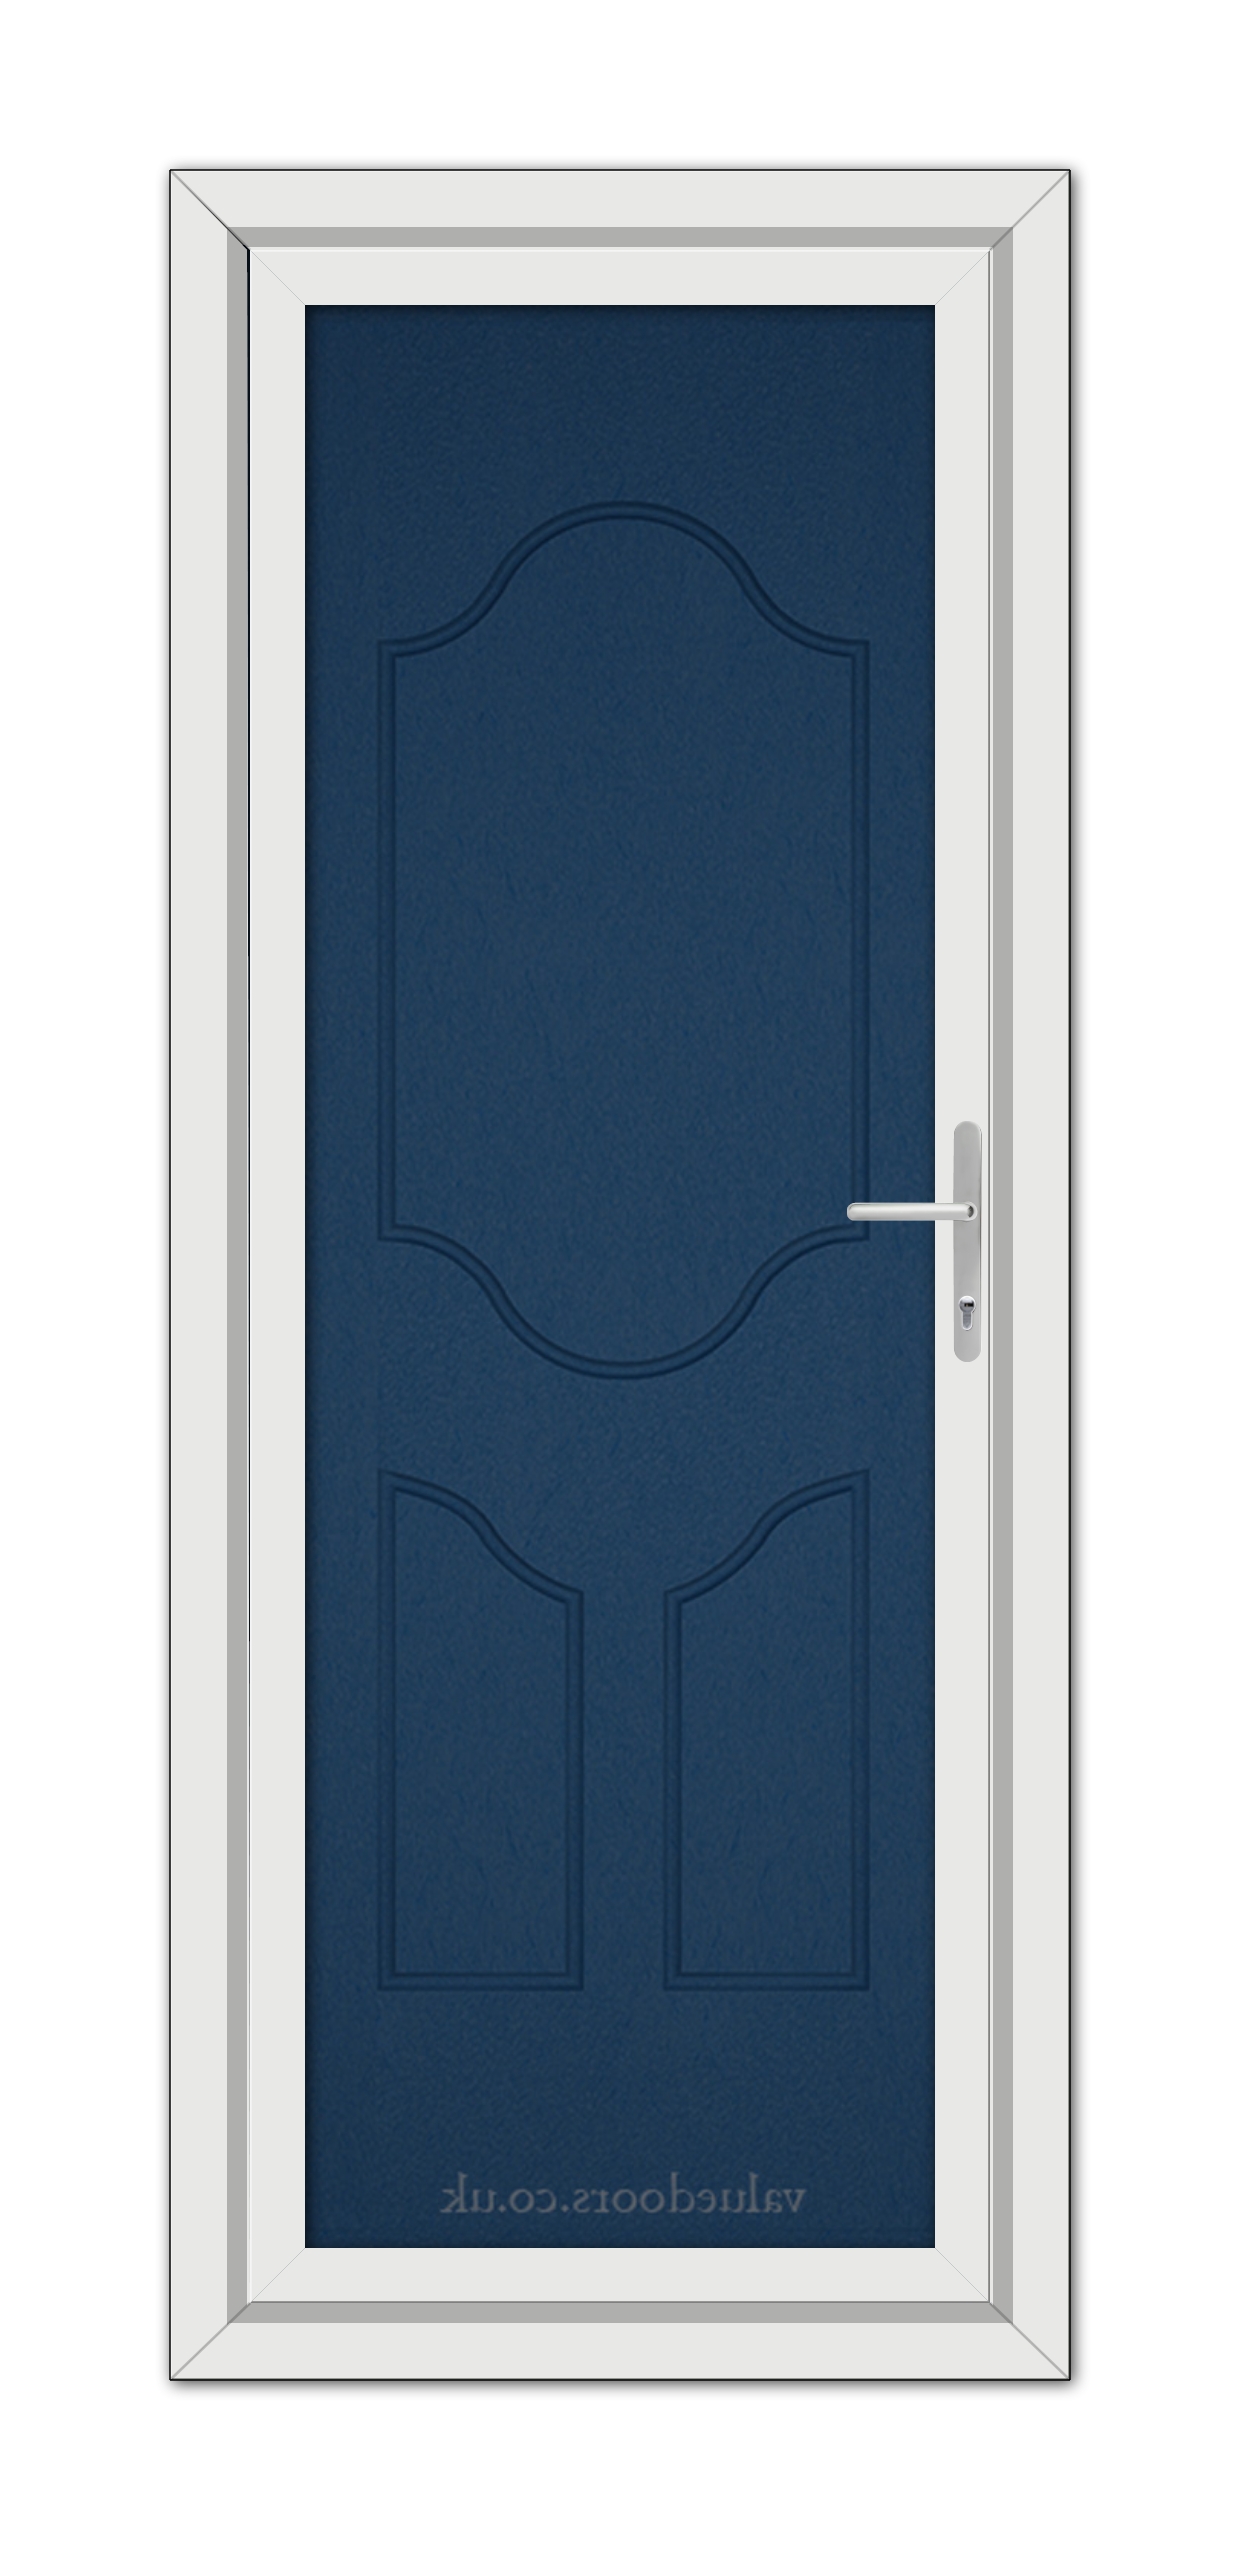 A vertical image of a closed Blue Althorpe Solid uPVC Door with a white frame and a silver handle, installed in a wall.